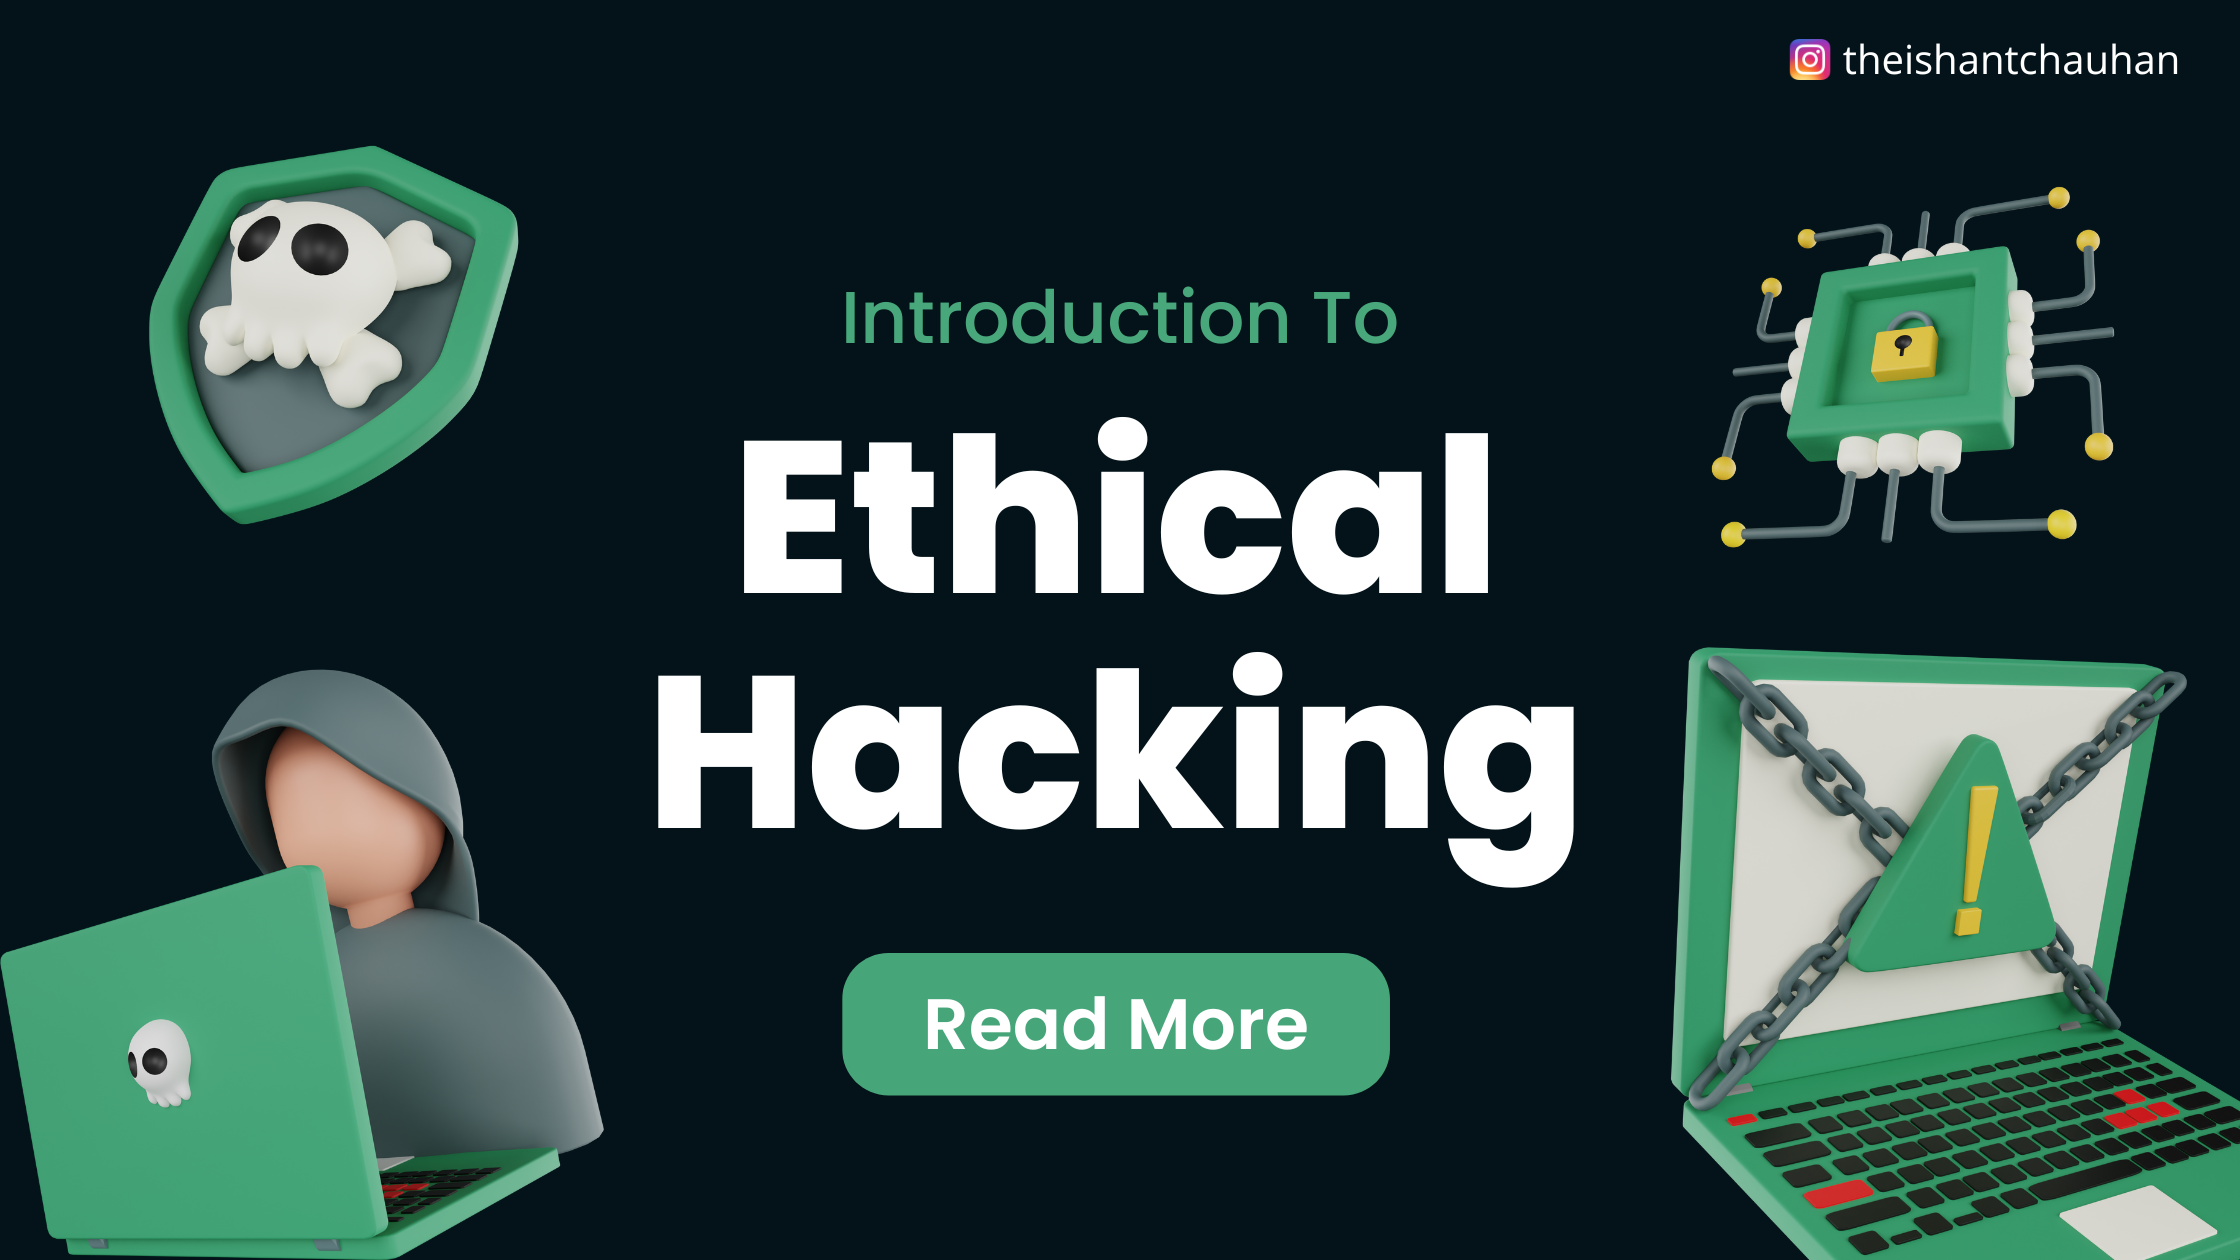 Introduction To Ethical Hacking: Attacks, Tools, Techniques And More